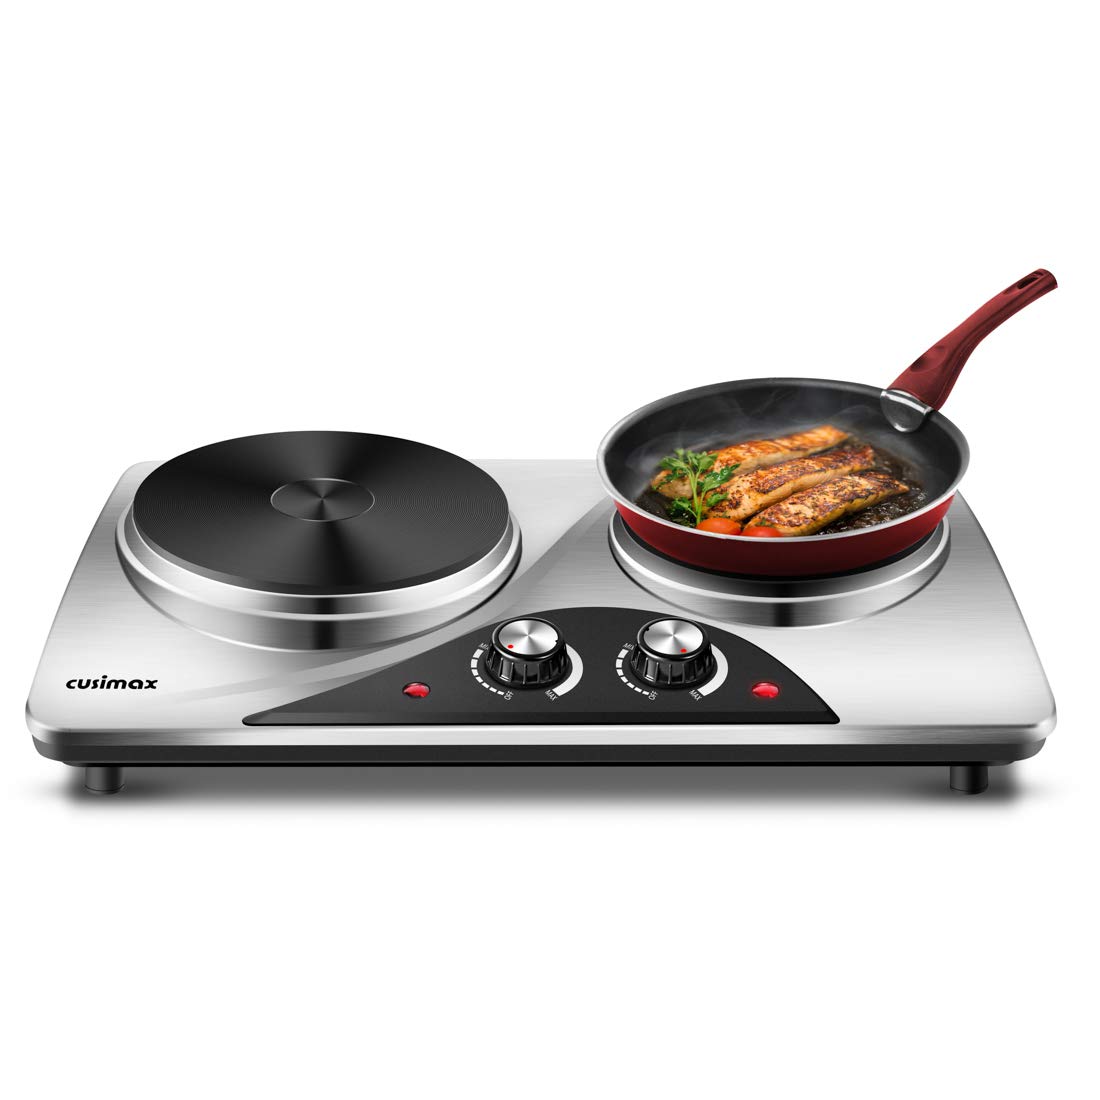 Cusimax Hot Plate Electric Burner Single Burner Cast Iron hot plates for  cooking Portable Burner 1500W with Adjustable Temperature Control Stainless